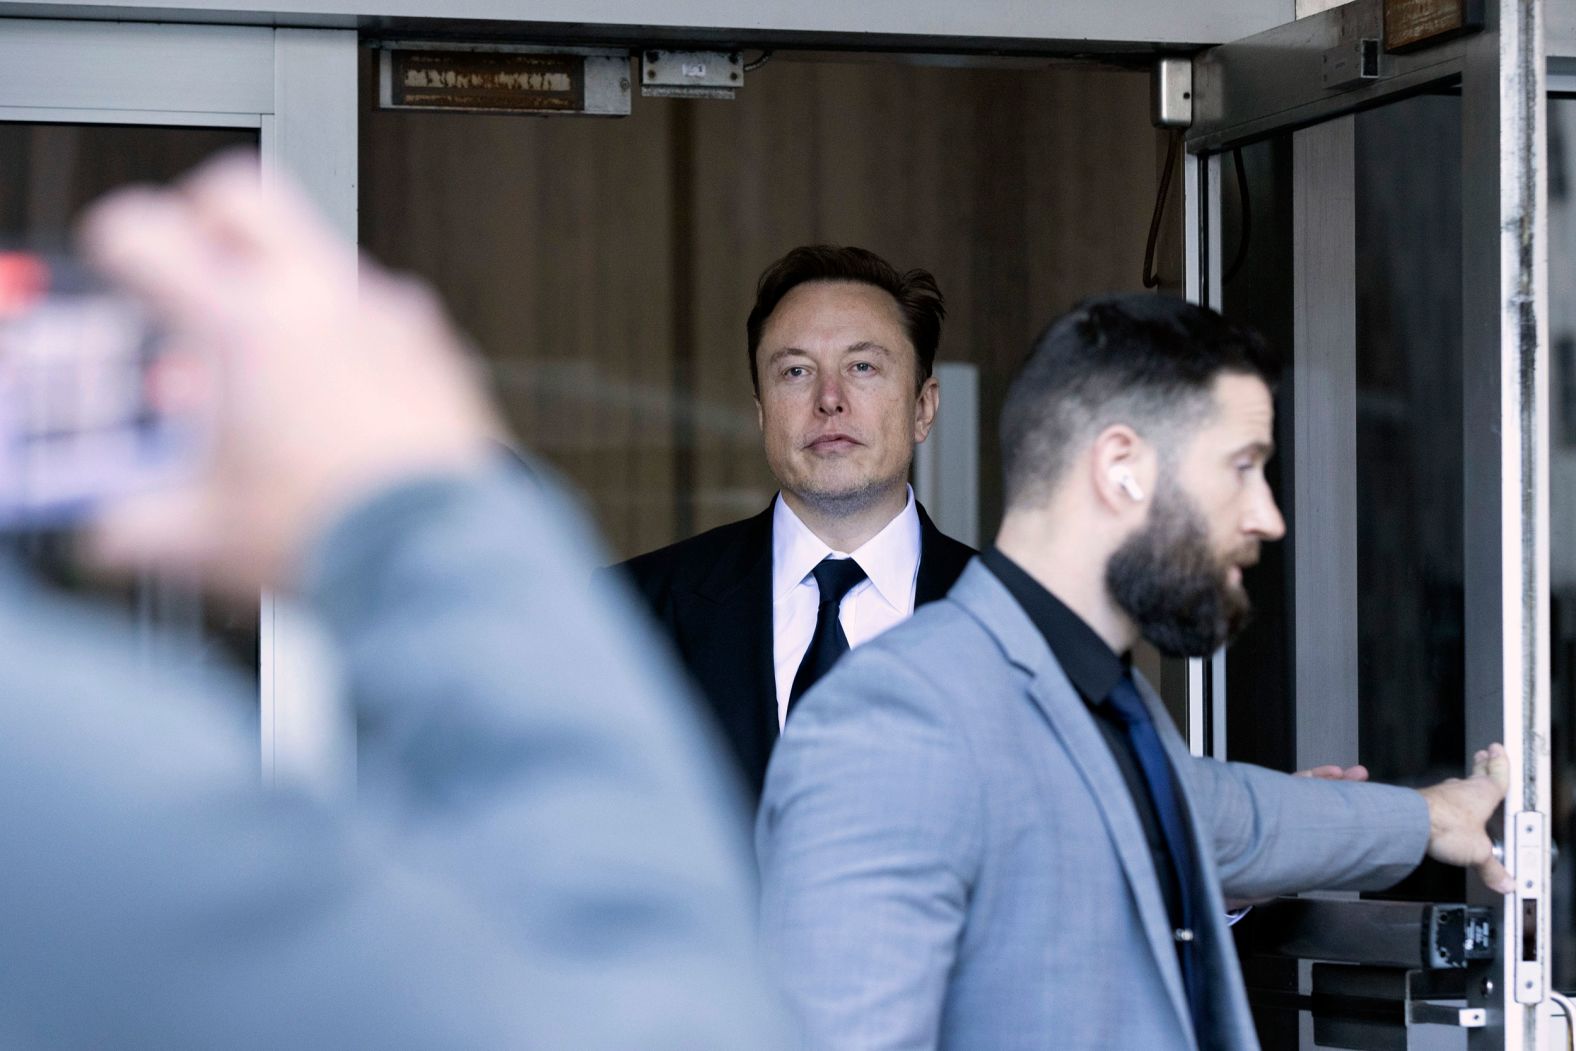 Tesla CEO Elon Musk leaves a federal courthouse in San Francisco on Tuesday, January 24. Musk, Tesla and company directors <a href="index.php?page=&url=https%3A%2F%2Fwww.cnn.com%2F2023%2F01%2F23%2Fbusiness%2Ftesla-trial-funding-secured-elon-musk%2Findex.html" target="_blank">are facing a shareholder lawsuit</a> over a 2018 tweet in which Musk said that he was thinking about taking Tesla private for $420 a share and had "funding secured." Those two words resulted in the CEO having to forfeit his position as Tesla's executive chairman and pay millions of dollars in fines and legal fees. 